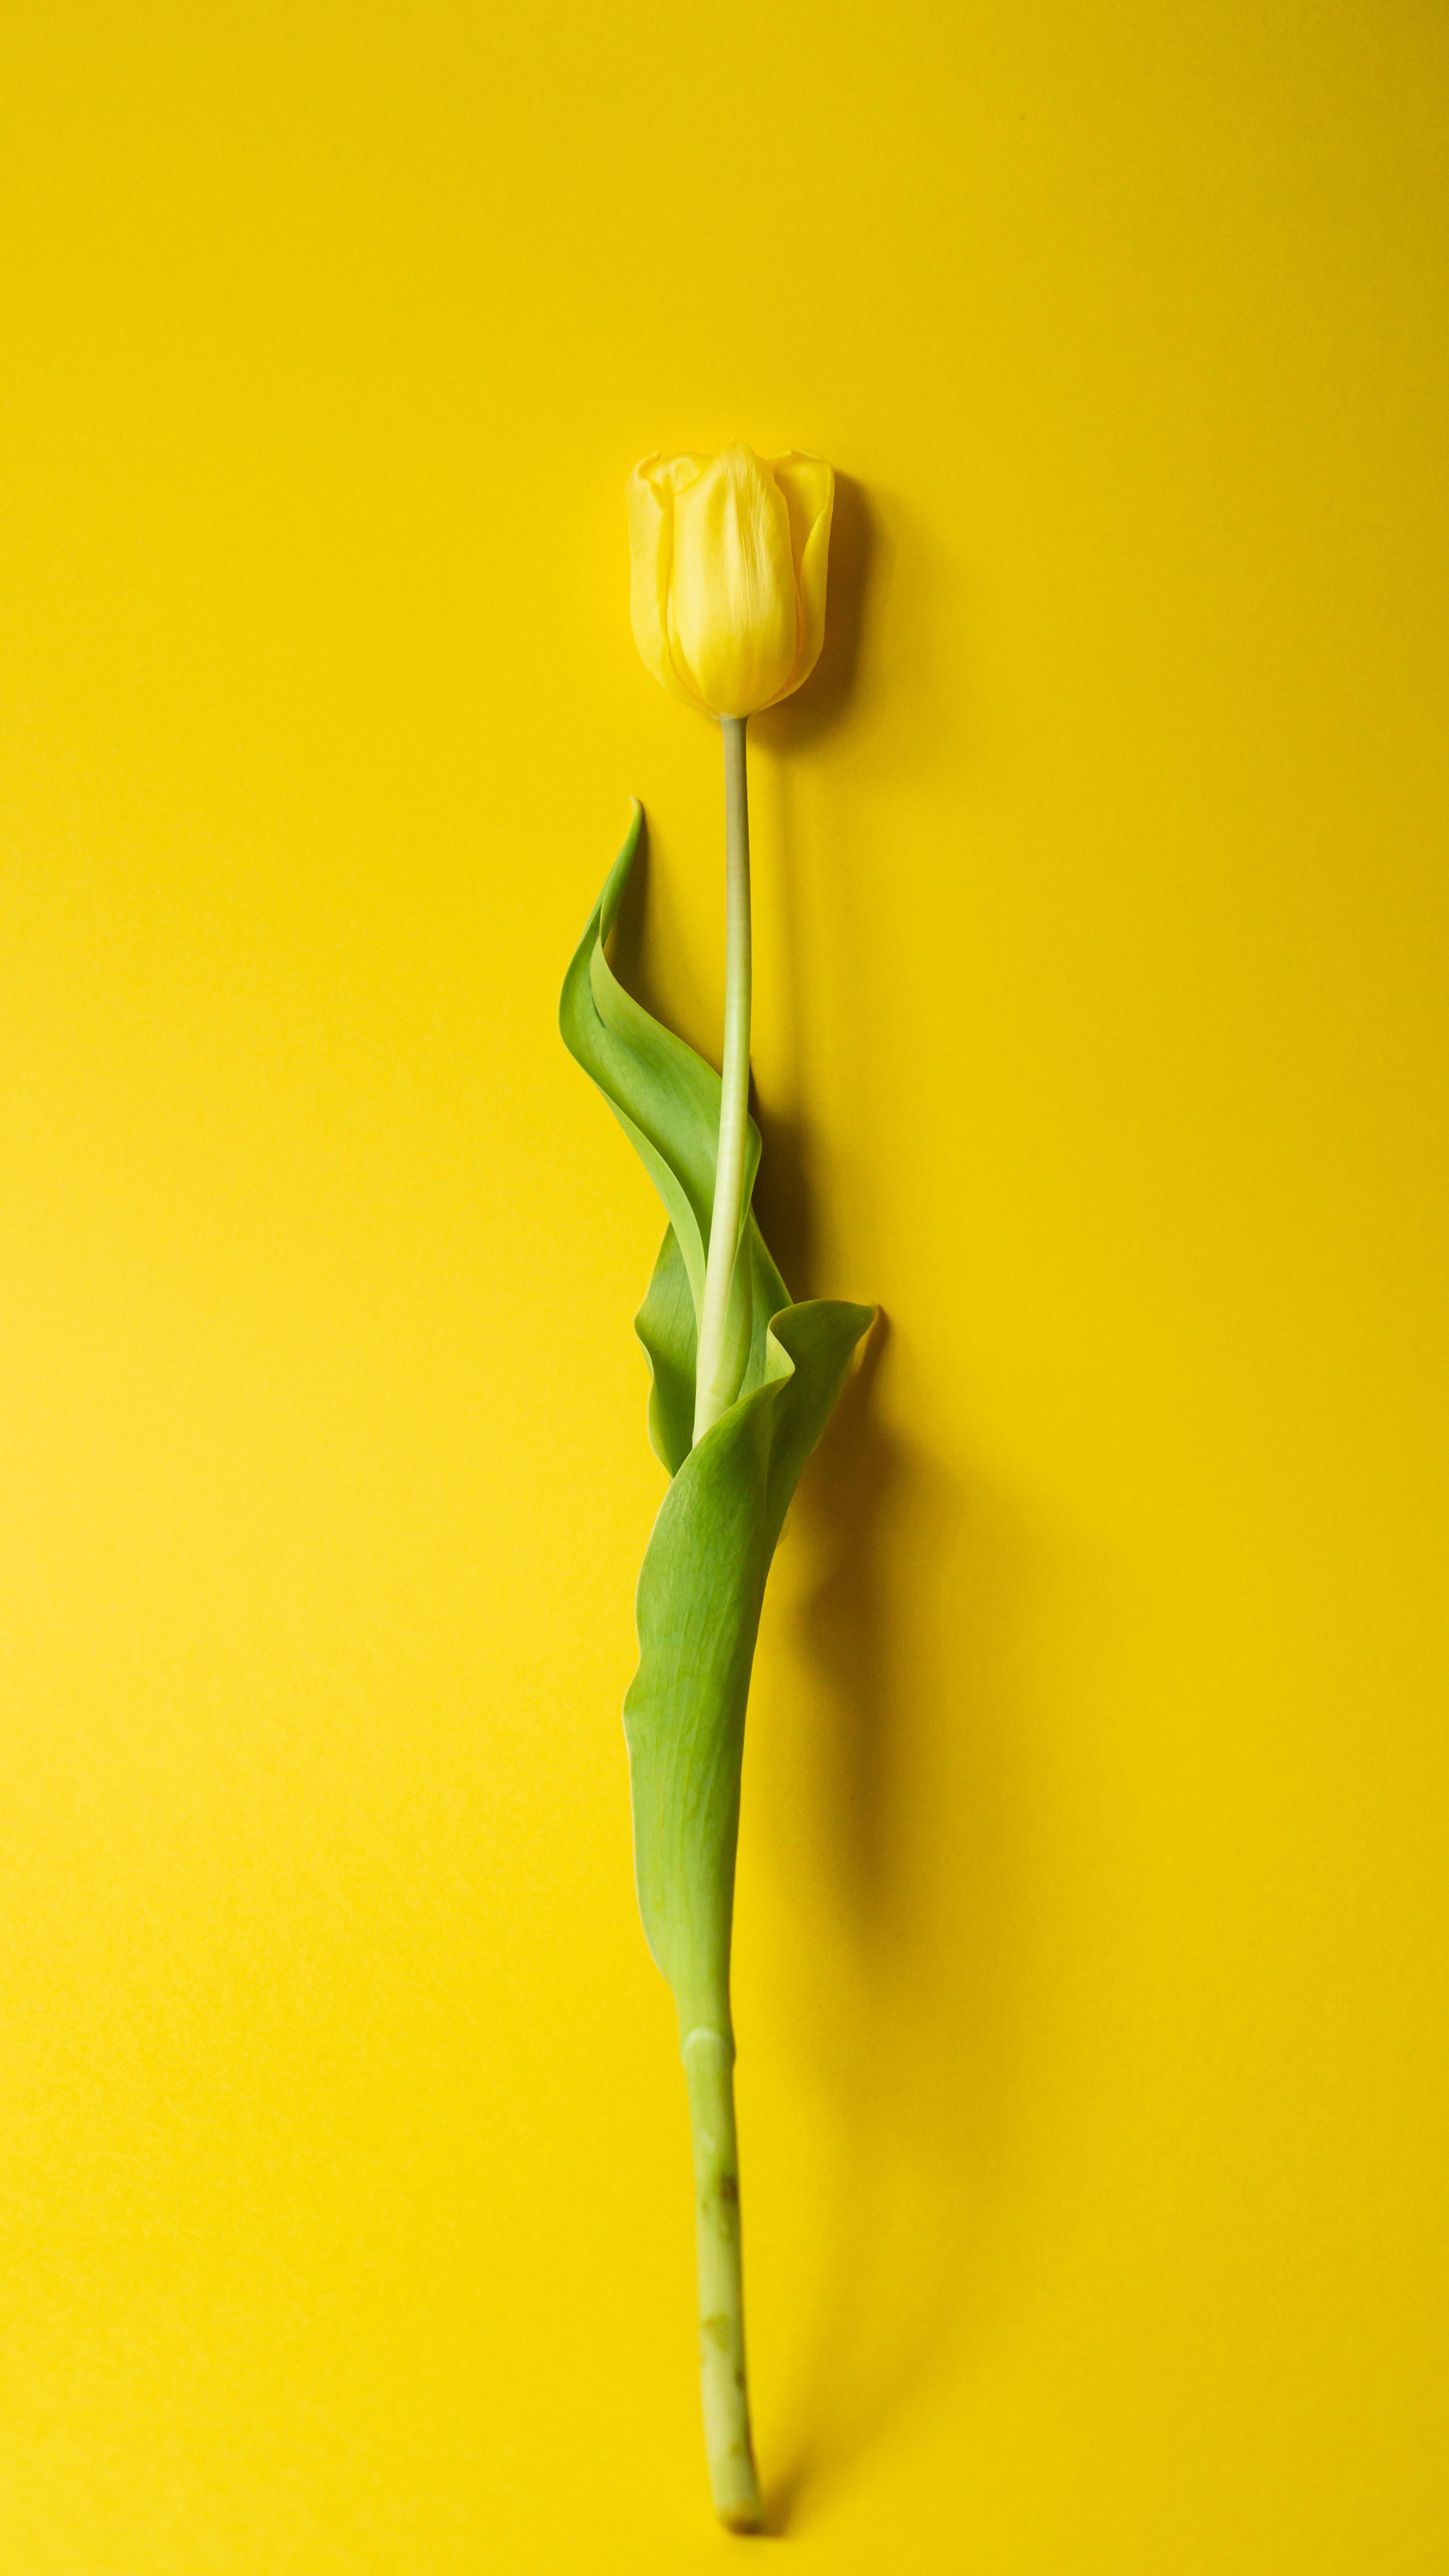 A single yellow tulip on top of an orange background - Tulip